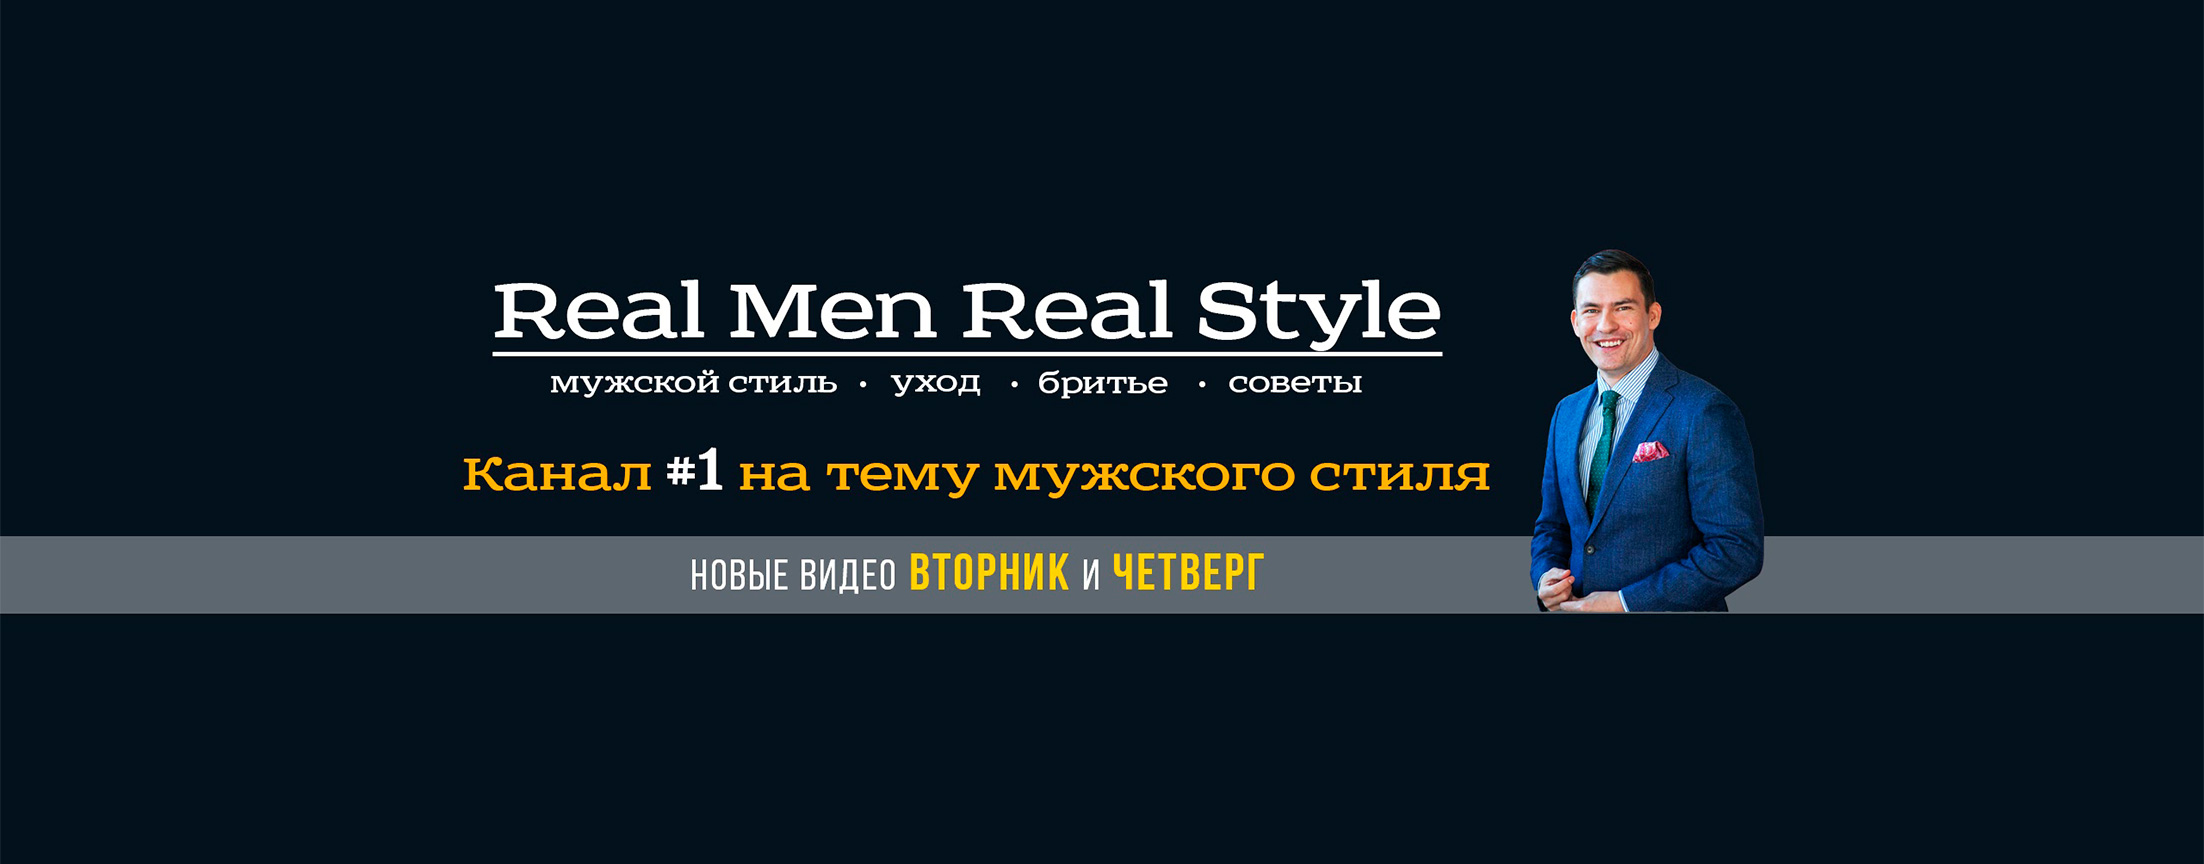 Real Men Real Style Russian